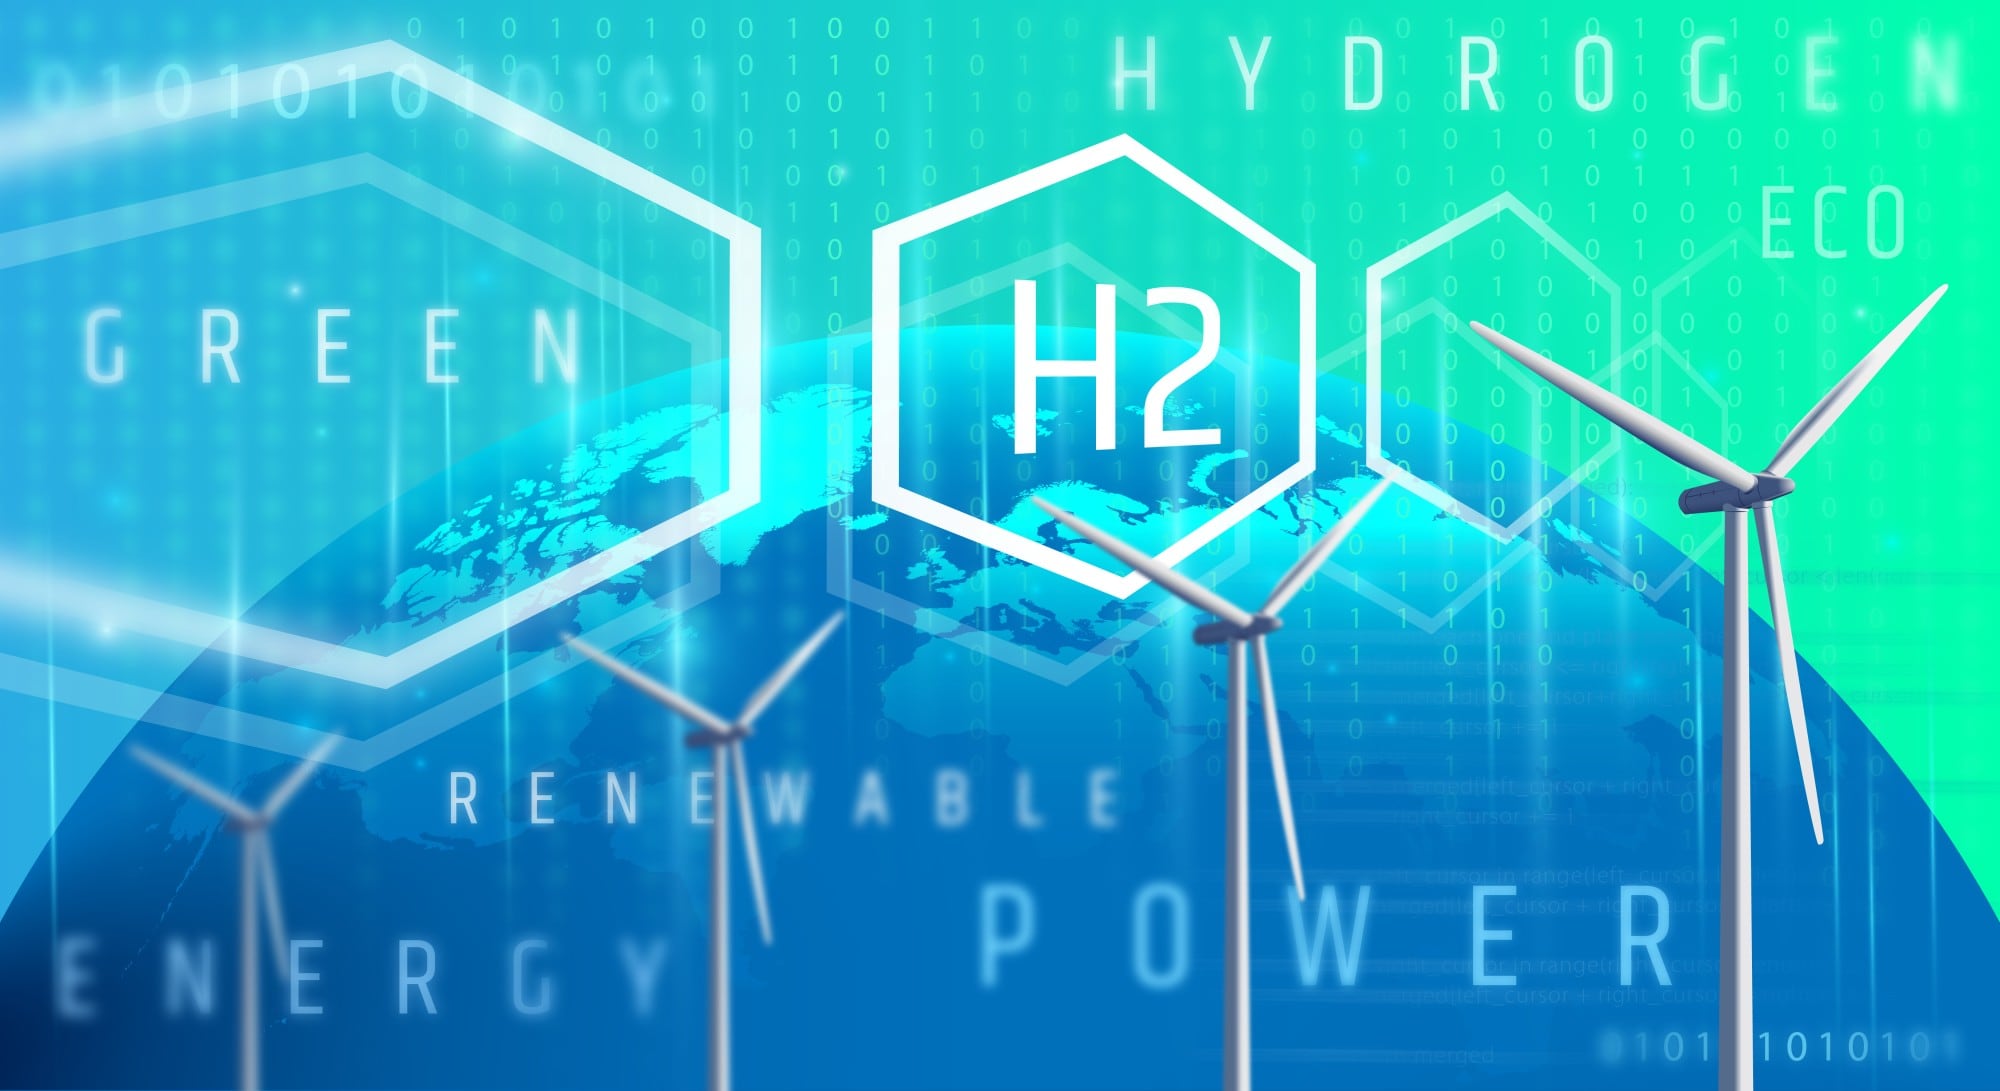 honeywell, honeywell green hydrogen, green hydrogen, energy transition, green energy transition, honeywell in talks to supply tech for green hydrogen, chemsitry tech for green hydrogen, honeywell indian companies, honeywell india, hydrogen, green hydrogen production, renewable energy,